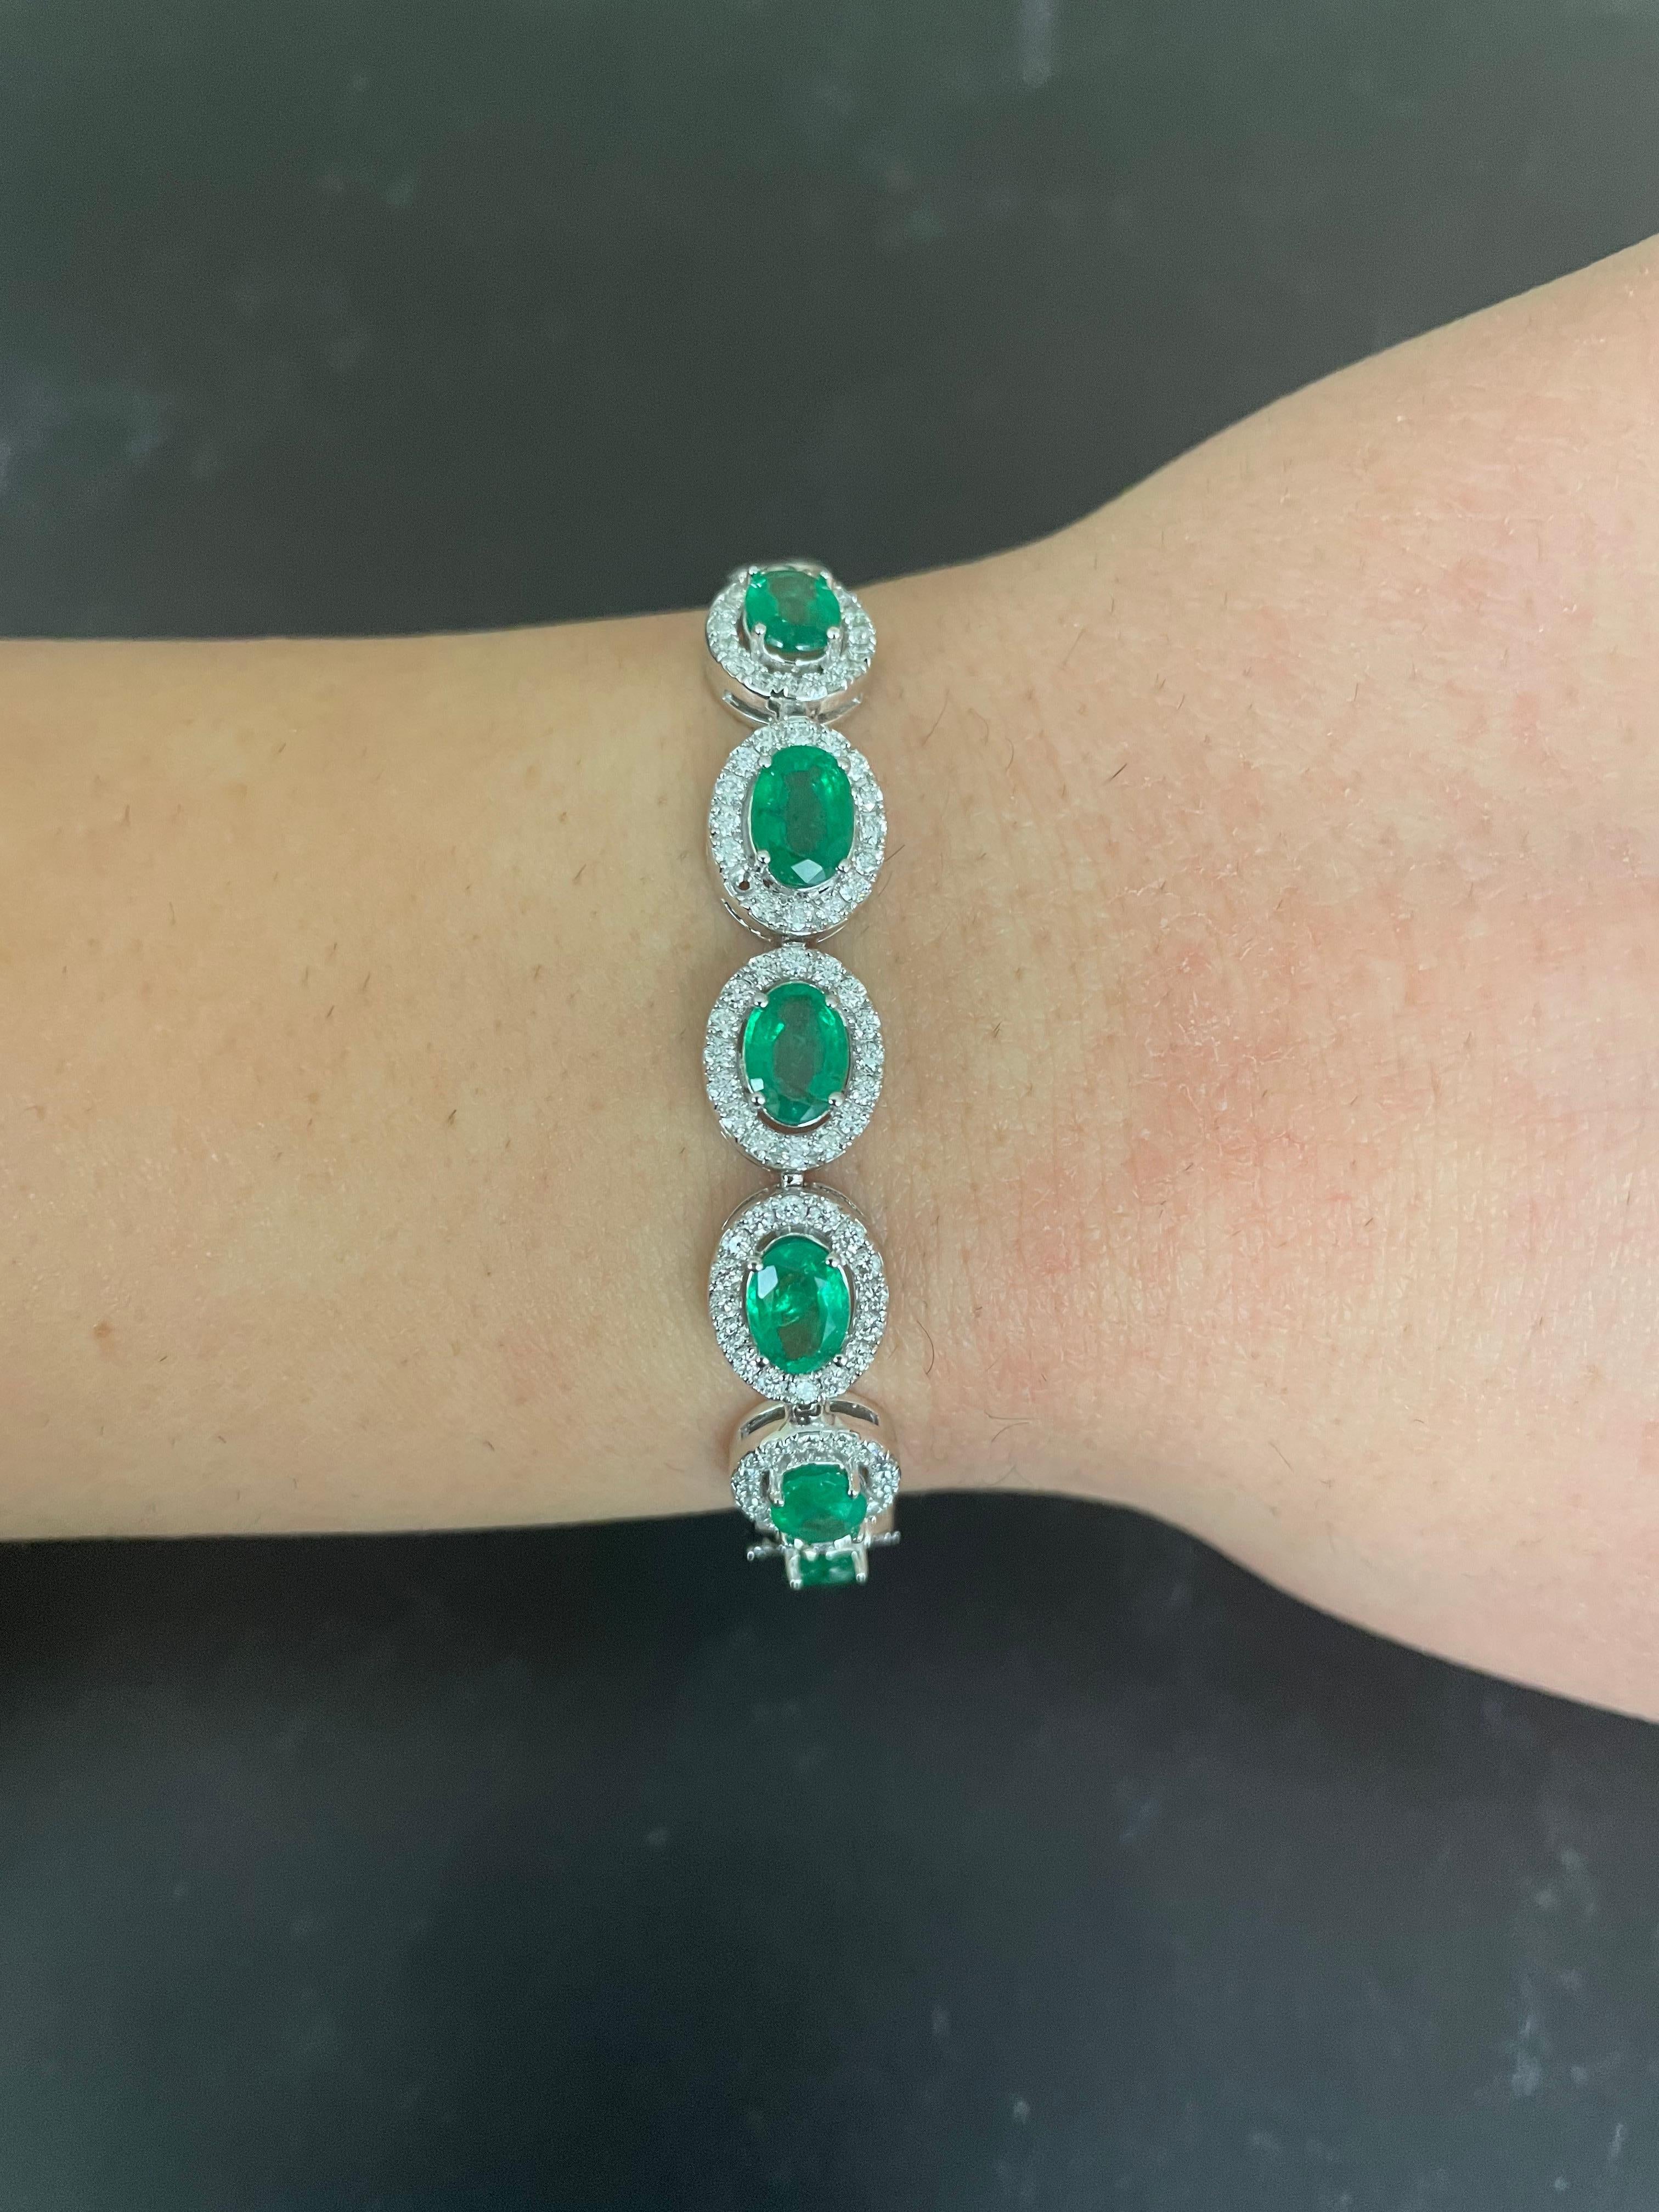 Stones: 7 Oval Emeralds at 4.40 Carats Total Weight
Accent Stones: 112 Round Brilliant Diamond 1.46 Carats Total Weight 
Clarity: SI / Color: H-I
Metal: 14K White Gold

Fine one-of-a-kind craftsmanship meets incredible quality in this breathtaking